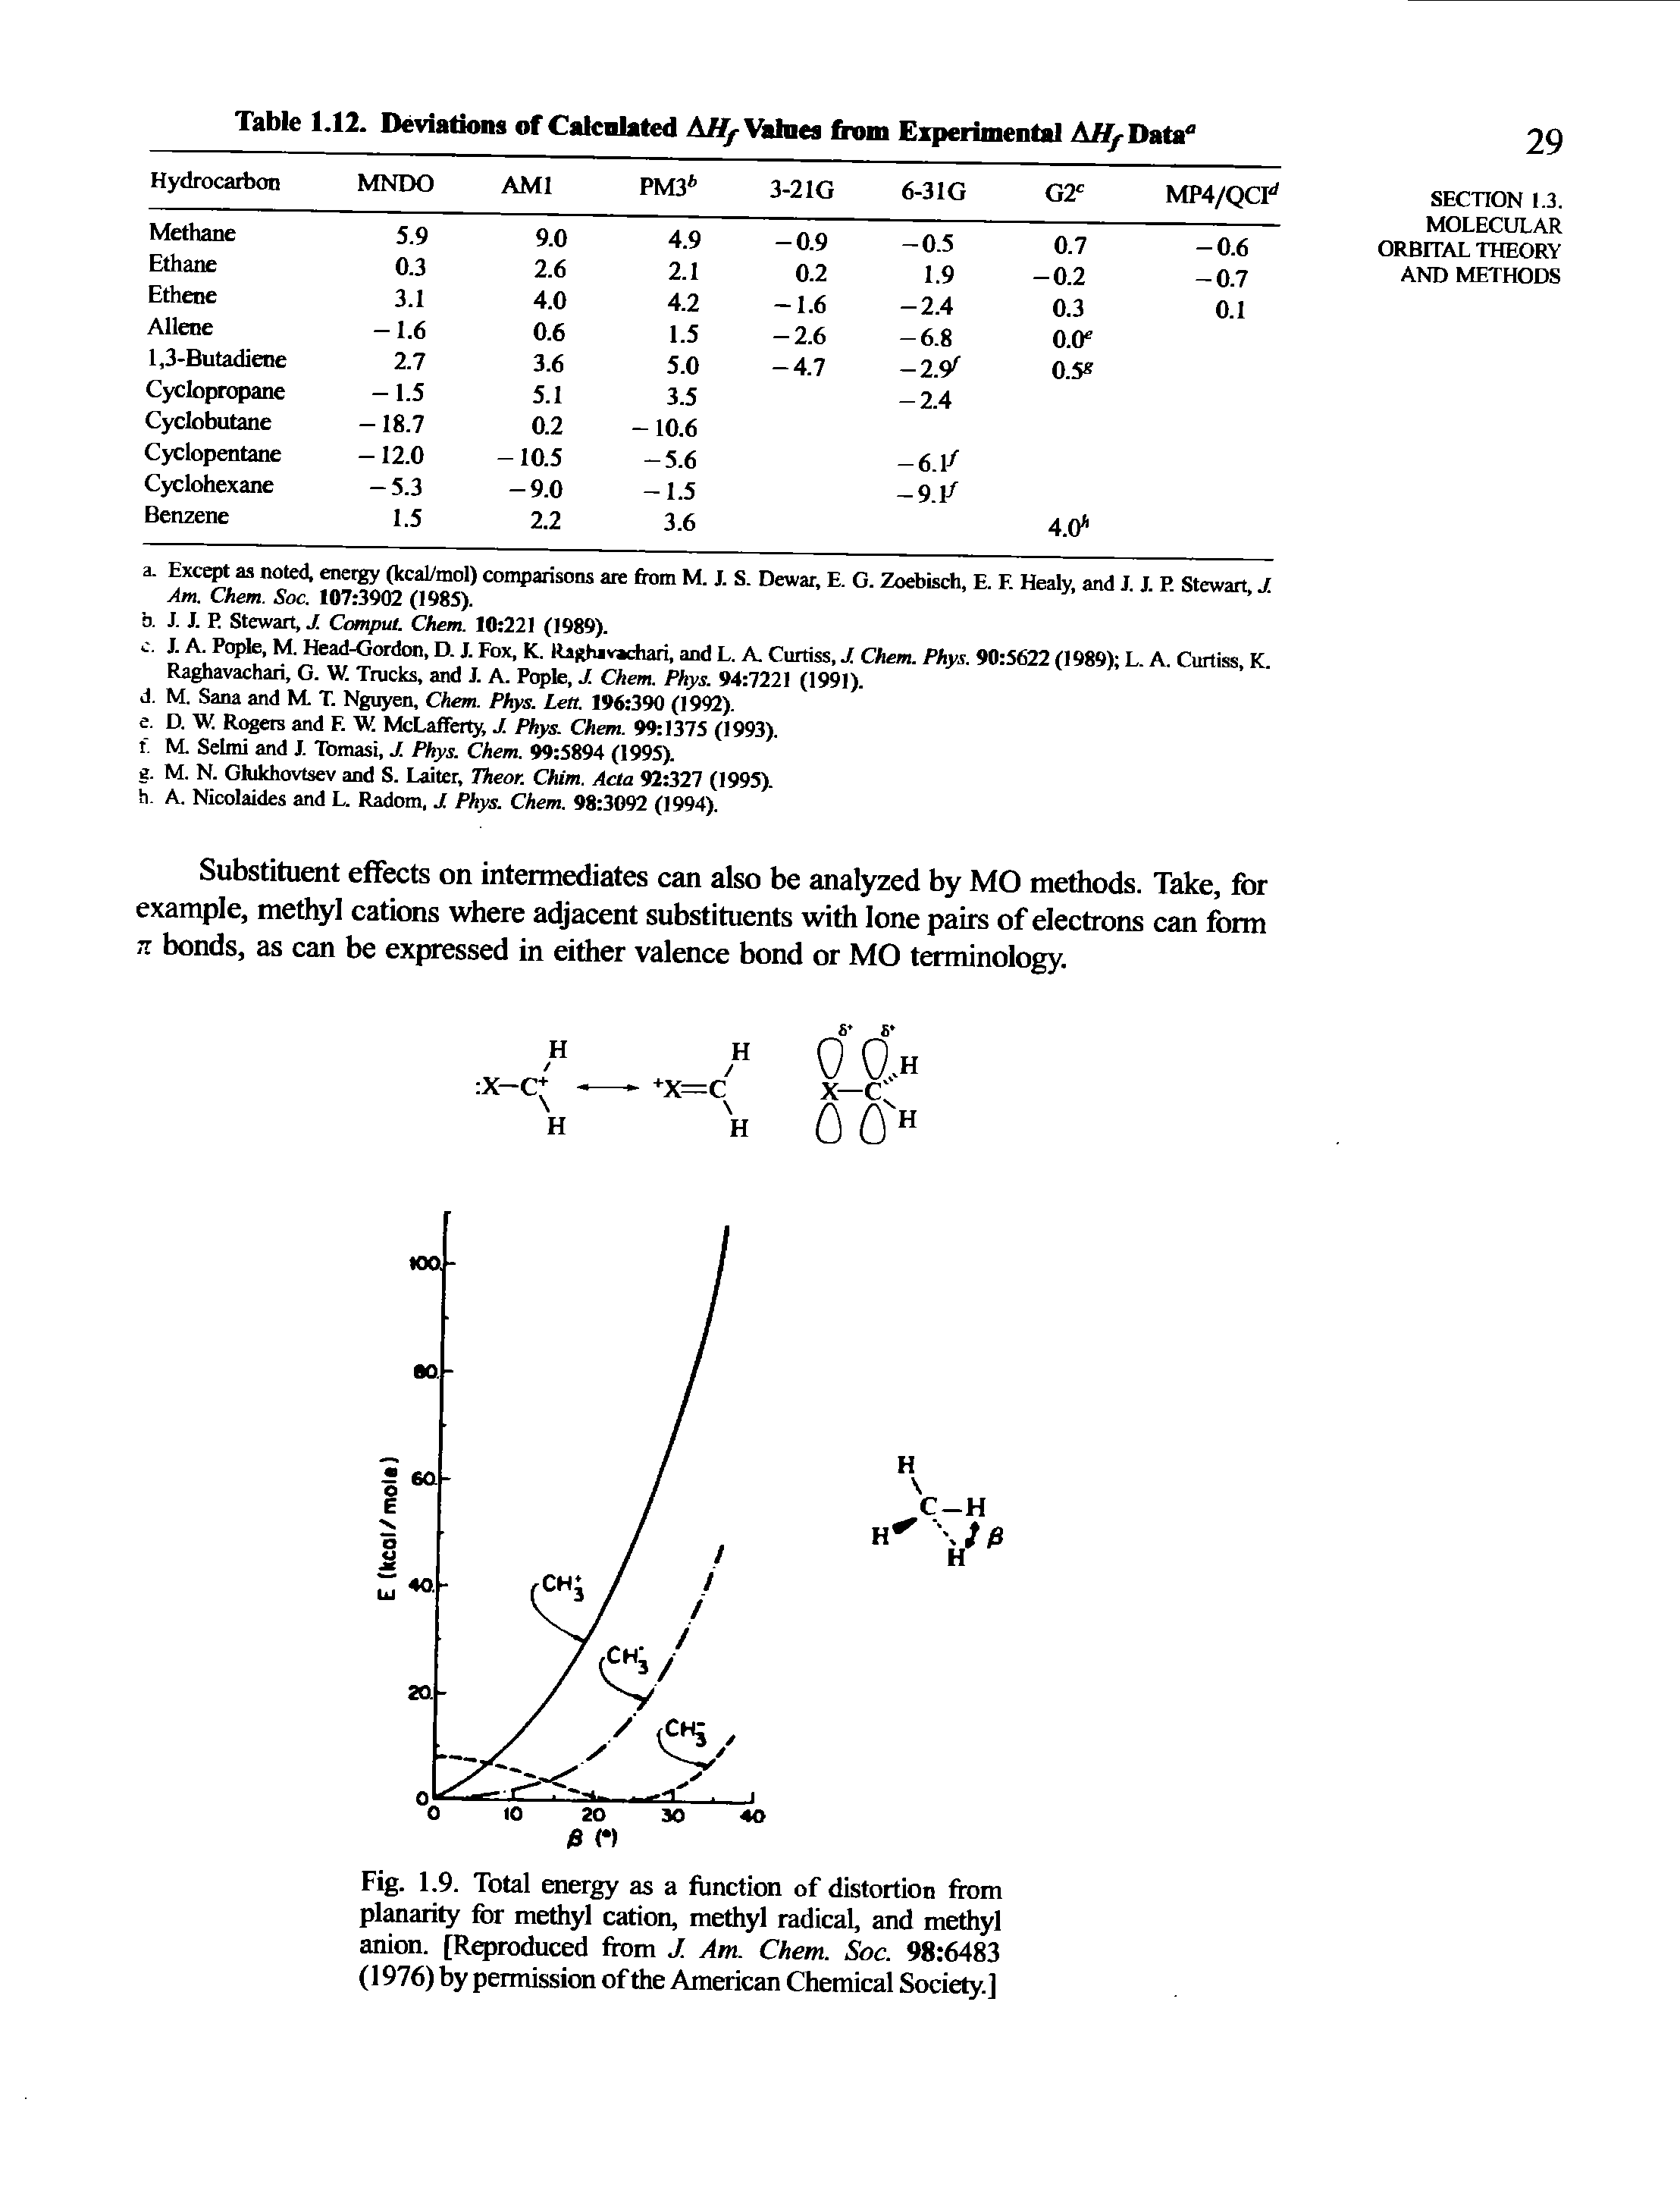 Fig. 1.9. Total energy as a function of distortion from planarity for methyl cation, methyl radical, and methyl anion. [Reproduced from J. Am. Chem. Soc. 98 6483 (1976) by permission of the American Chemical Society.]...